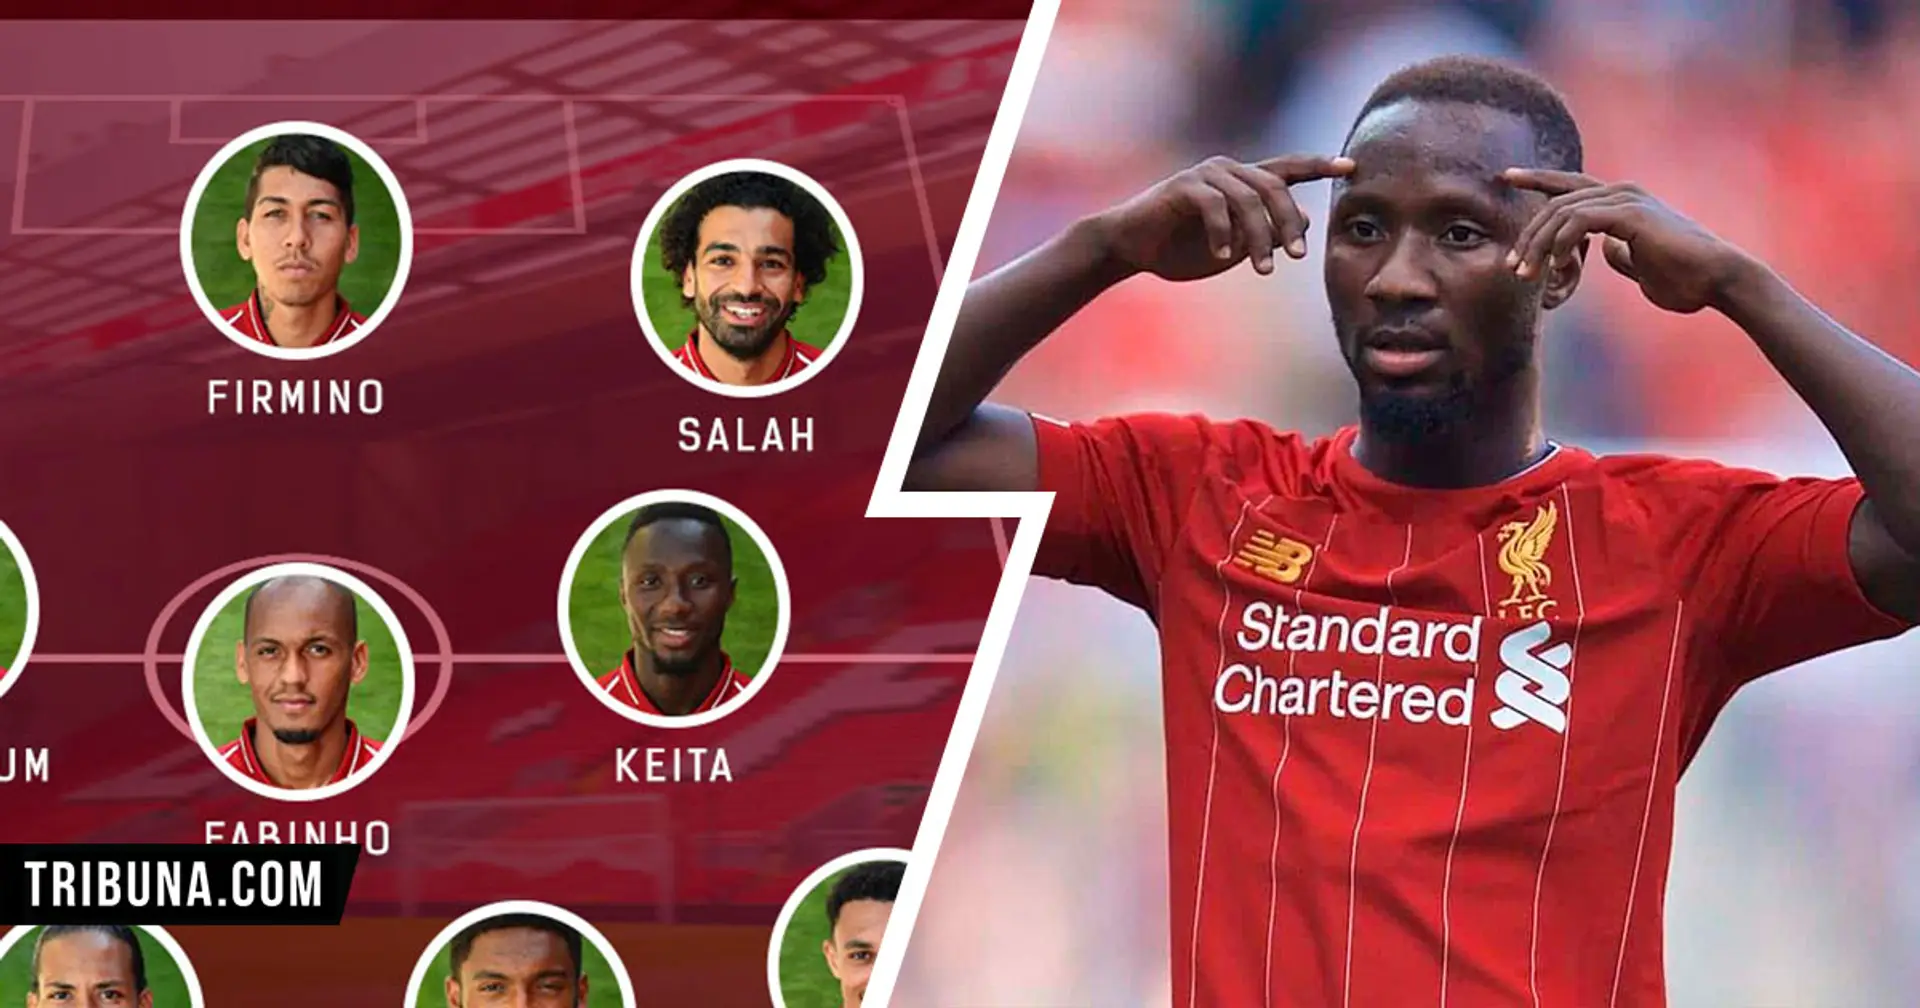 Another start for Keita?: Liverpool's probable XI vs Burnley